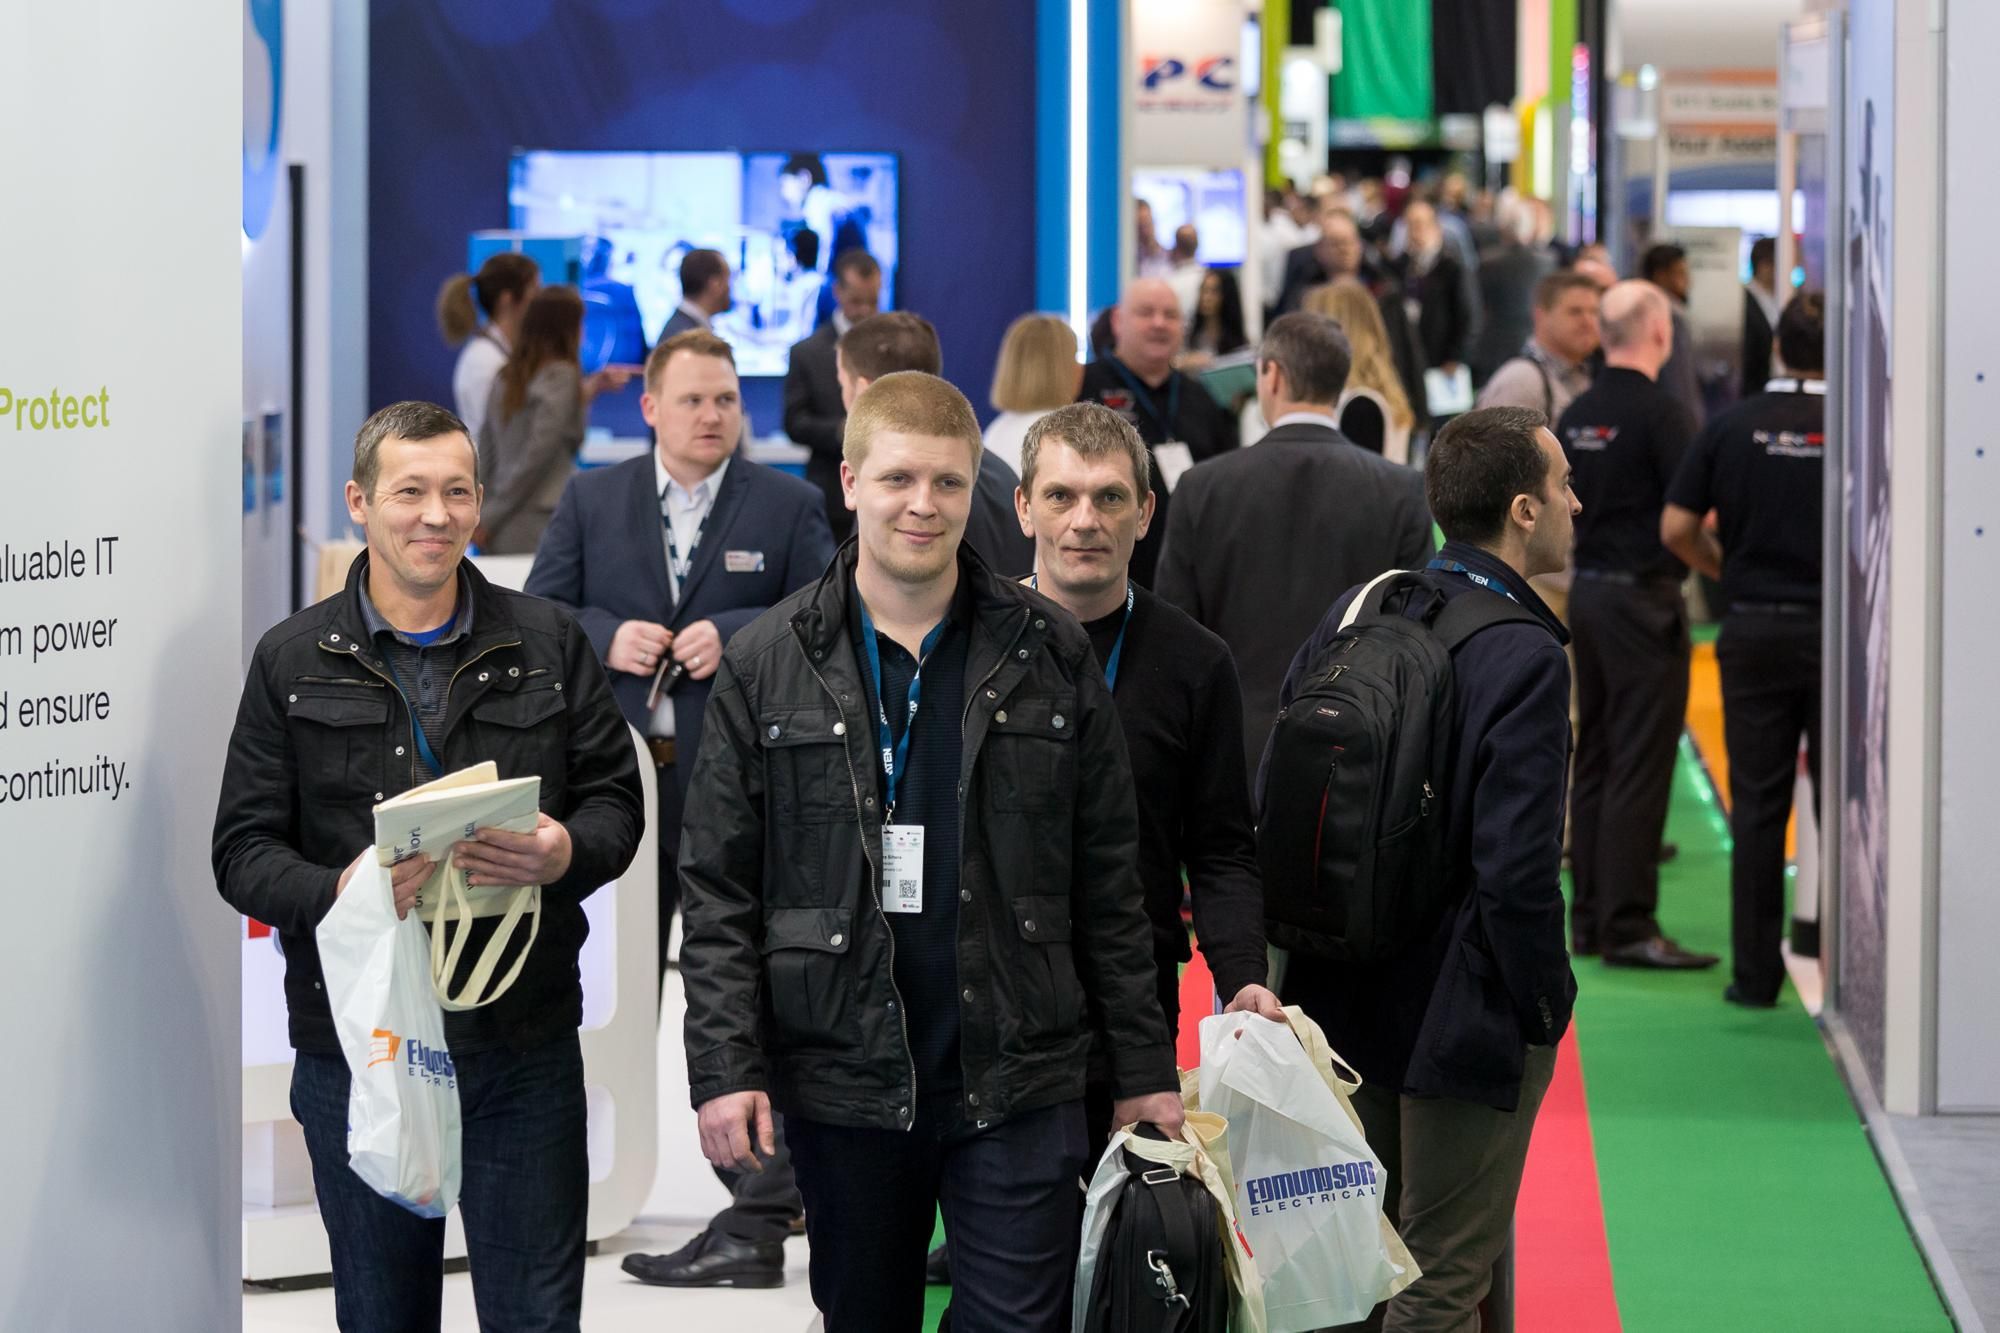 There are many reasons to visit Germany's largest data centre event...